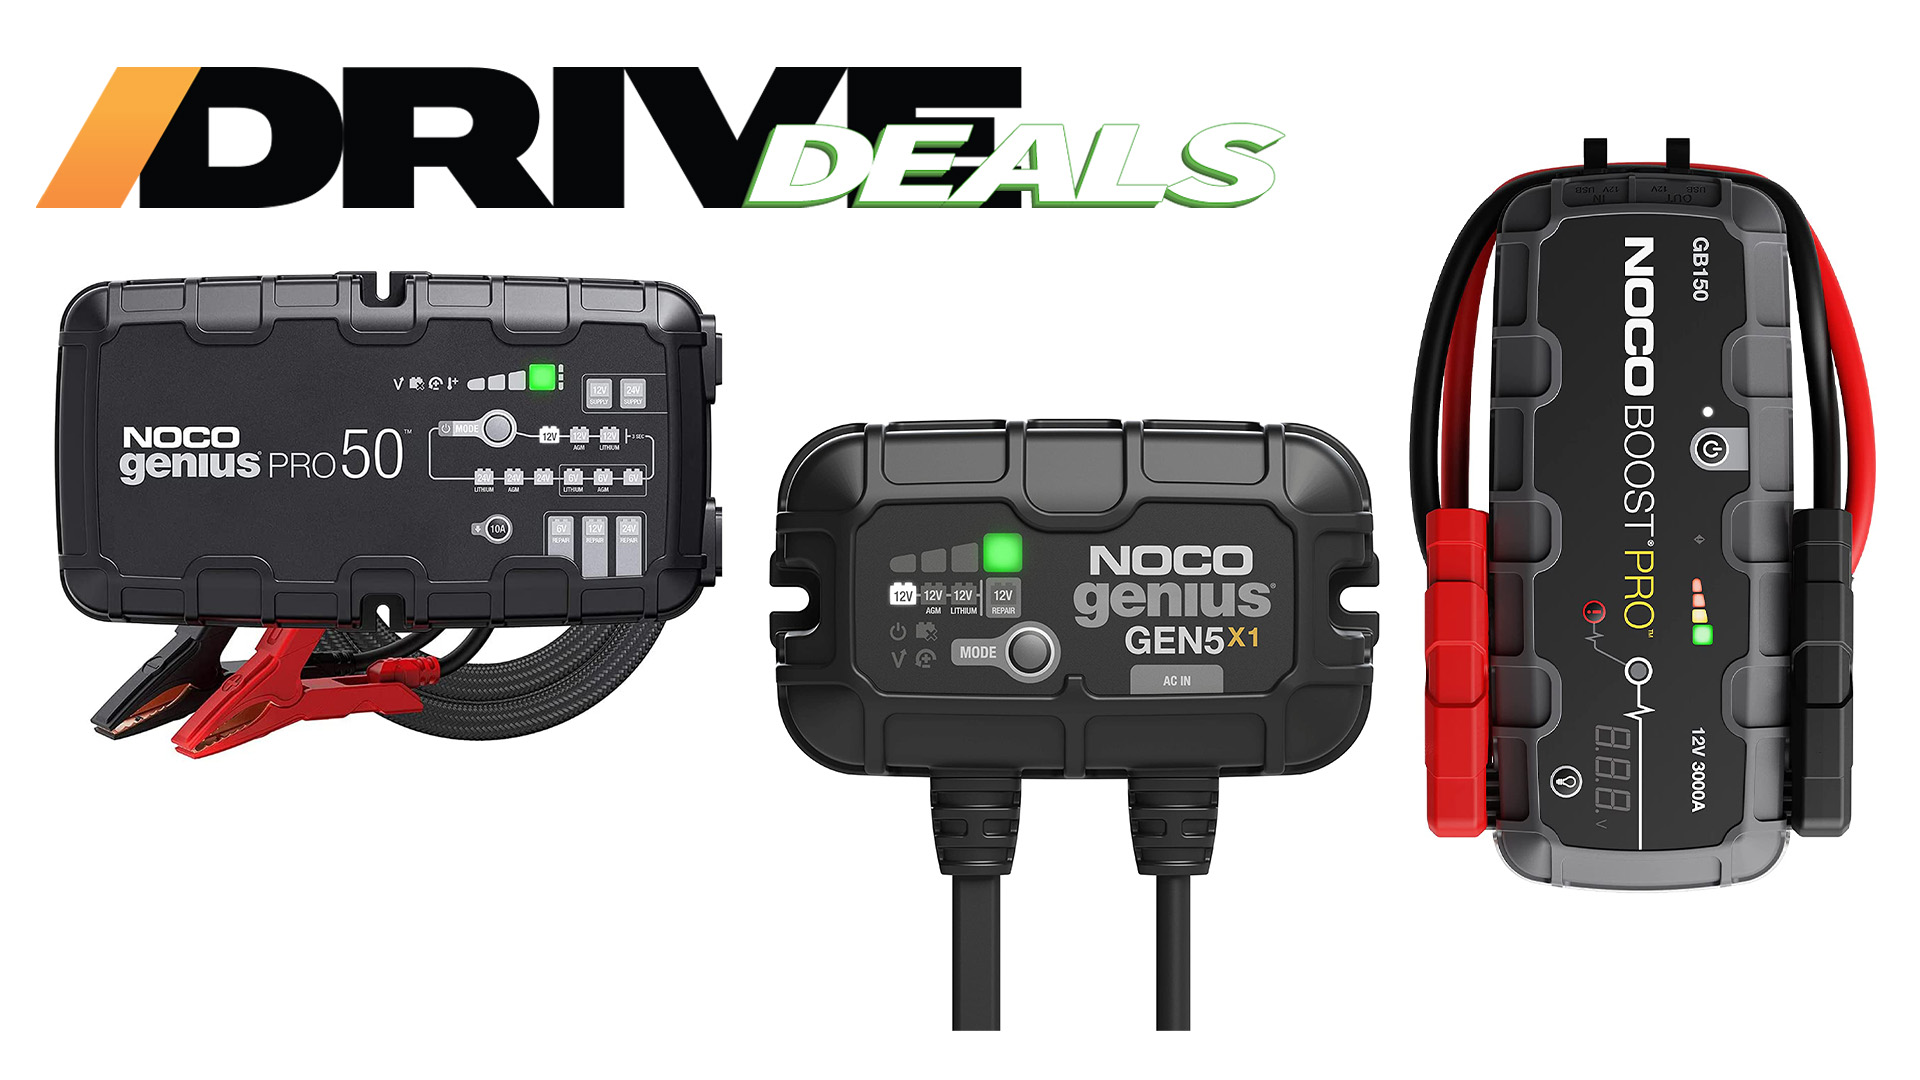 NOCO's Cyber Monday Deals Will Keep Your Project Charged All Winter